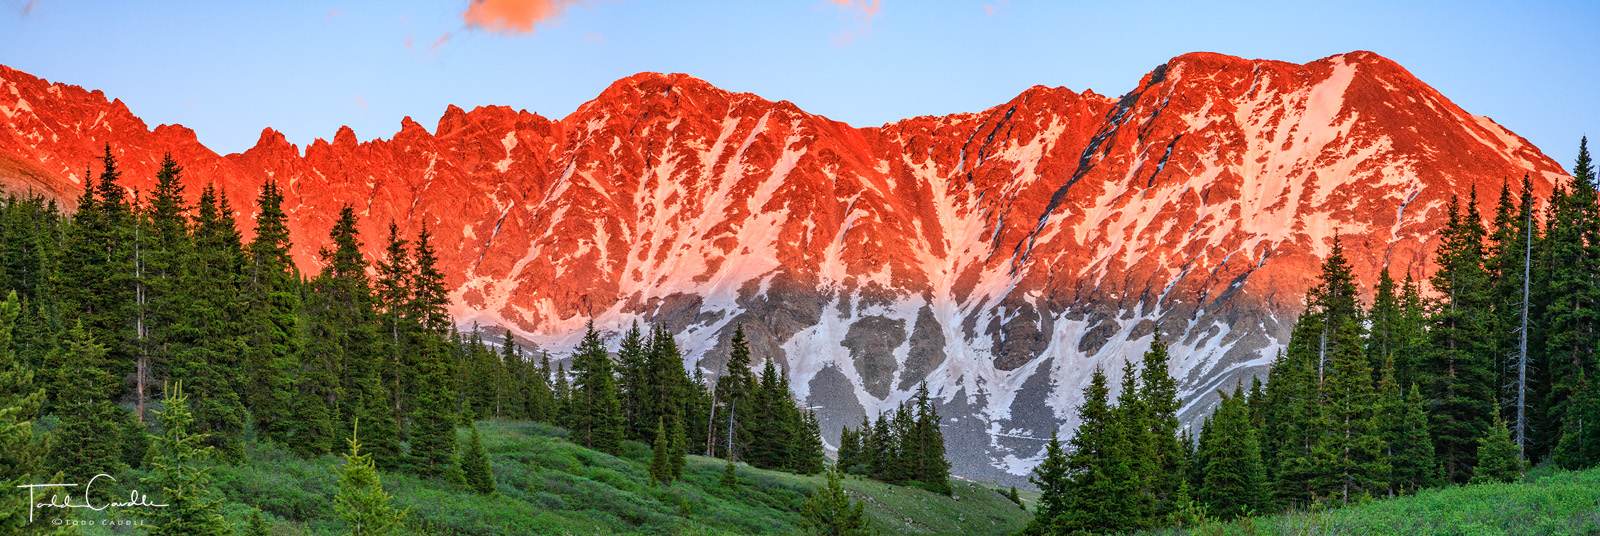 The headwall of Mayflower Gulch in the Tenmile Range basks in the rich alpenglow of a high altitude sunset.